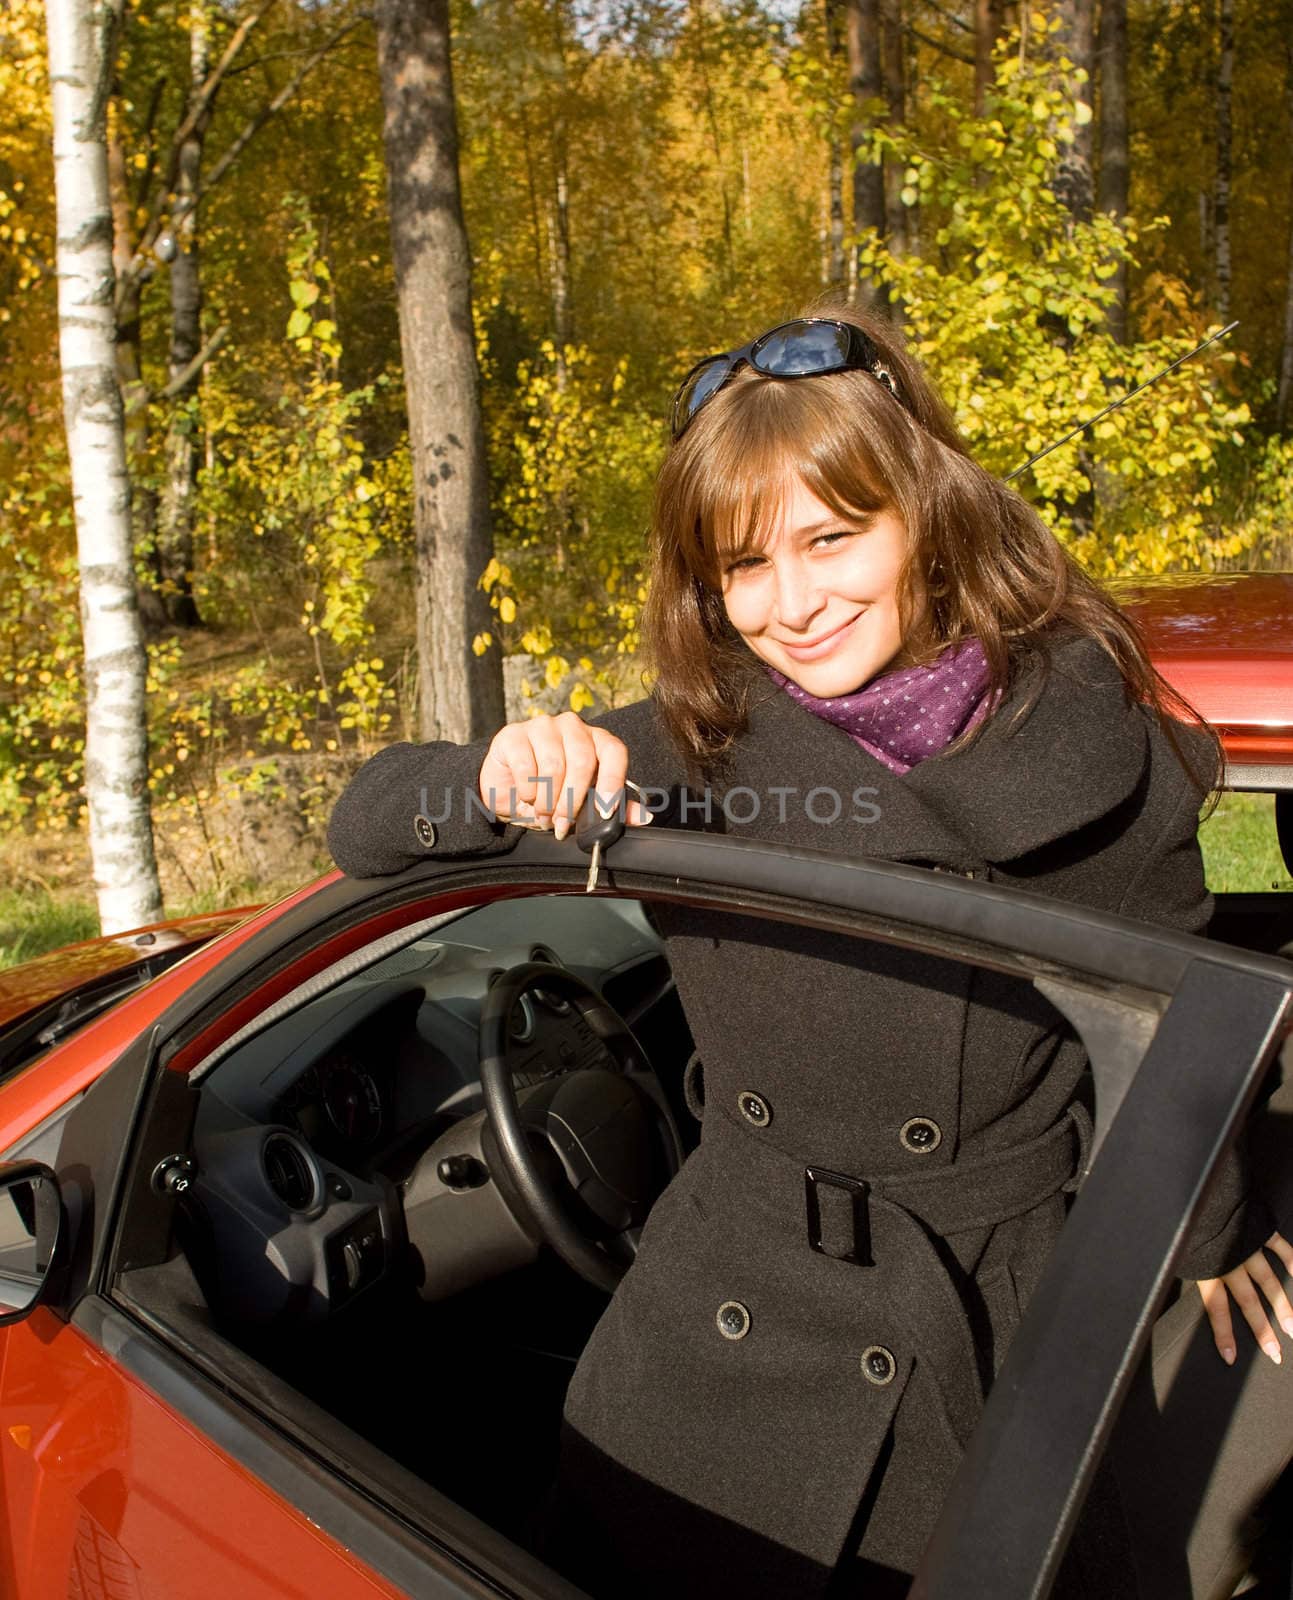 The girl with a key leaves the red car